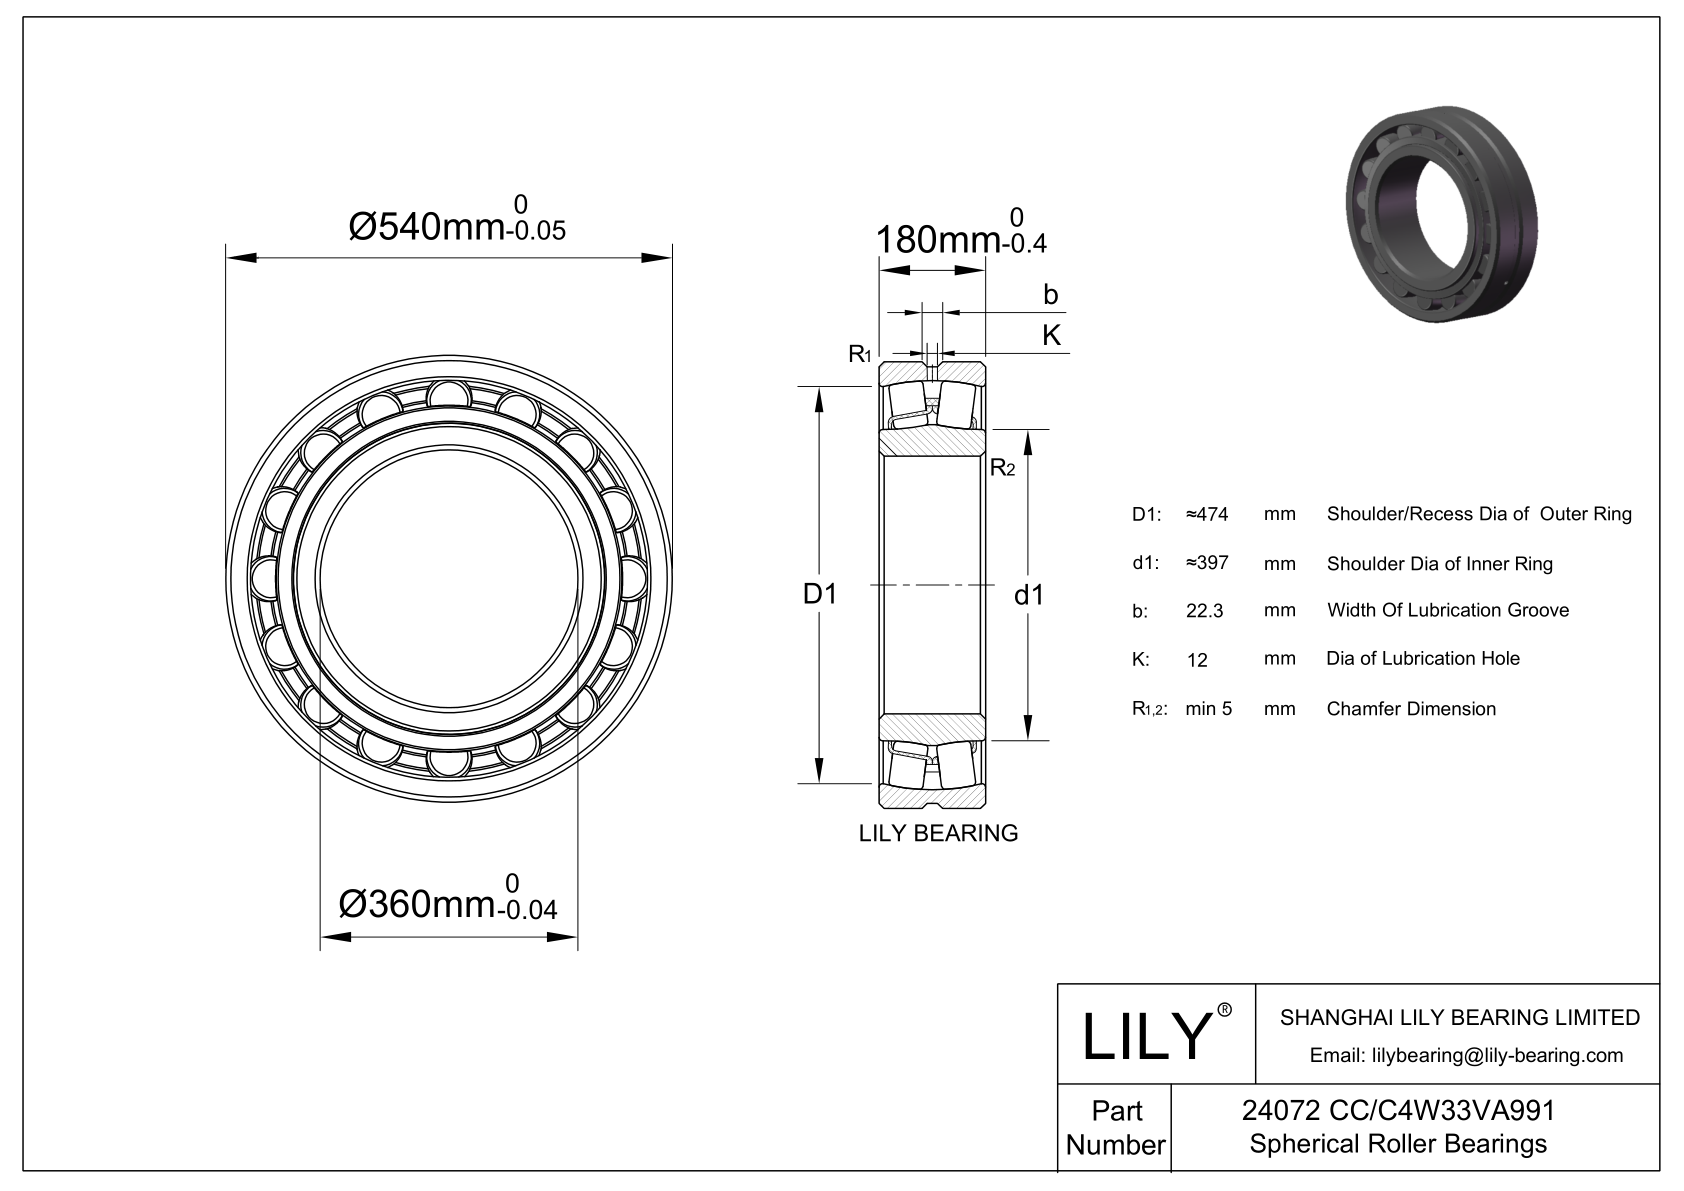 24072 CC/C4W33VA991 Double Row Spherical Roller Bearing cad drawing